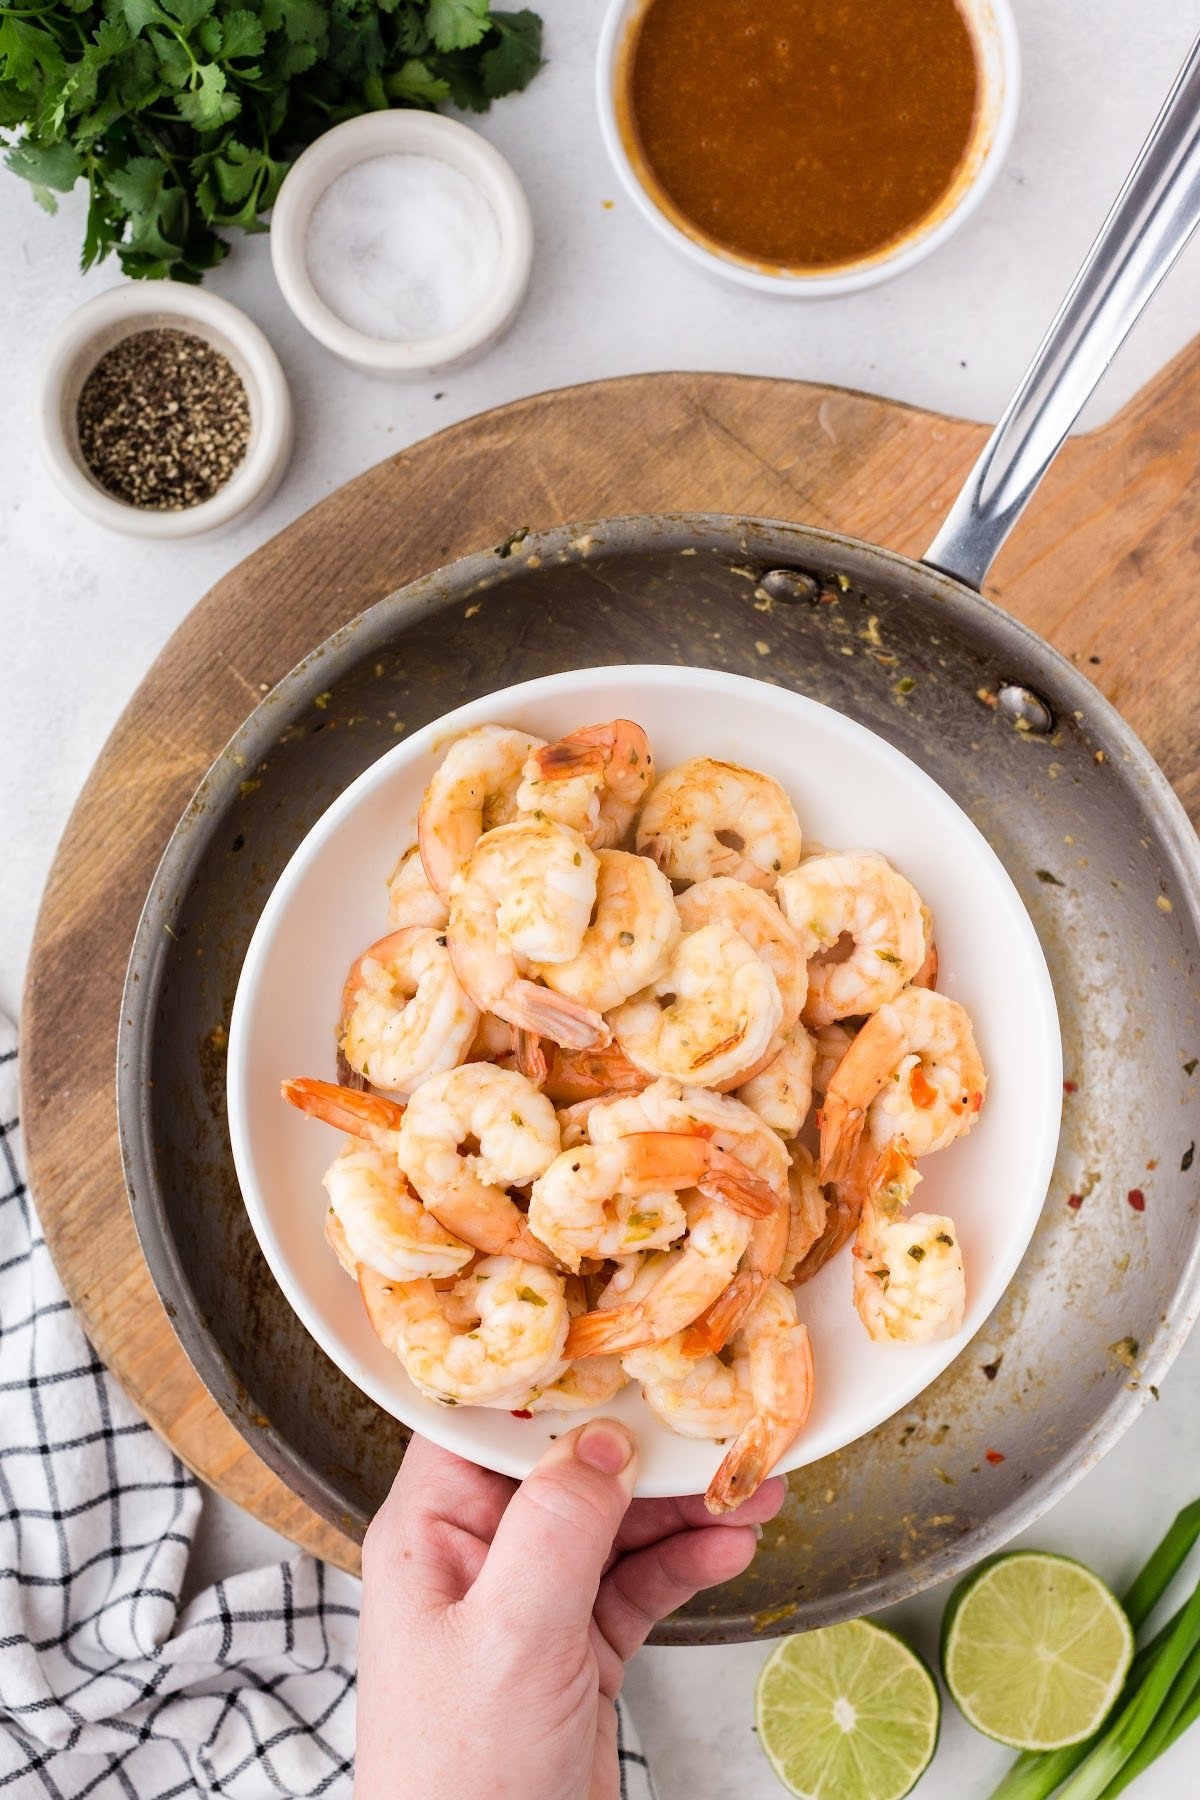 Shrimp removed from the pan and put on a plate to cool off and stop cooking.